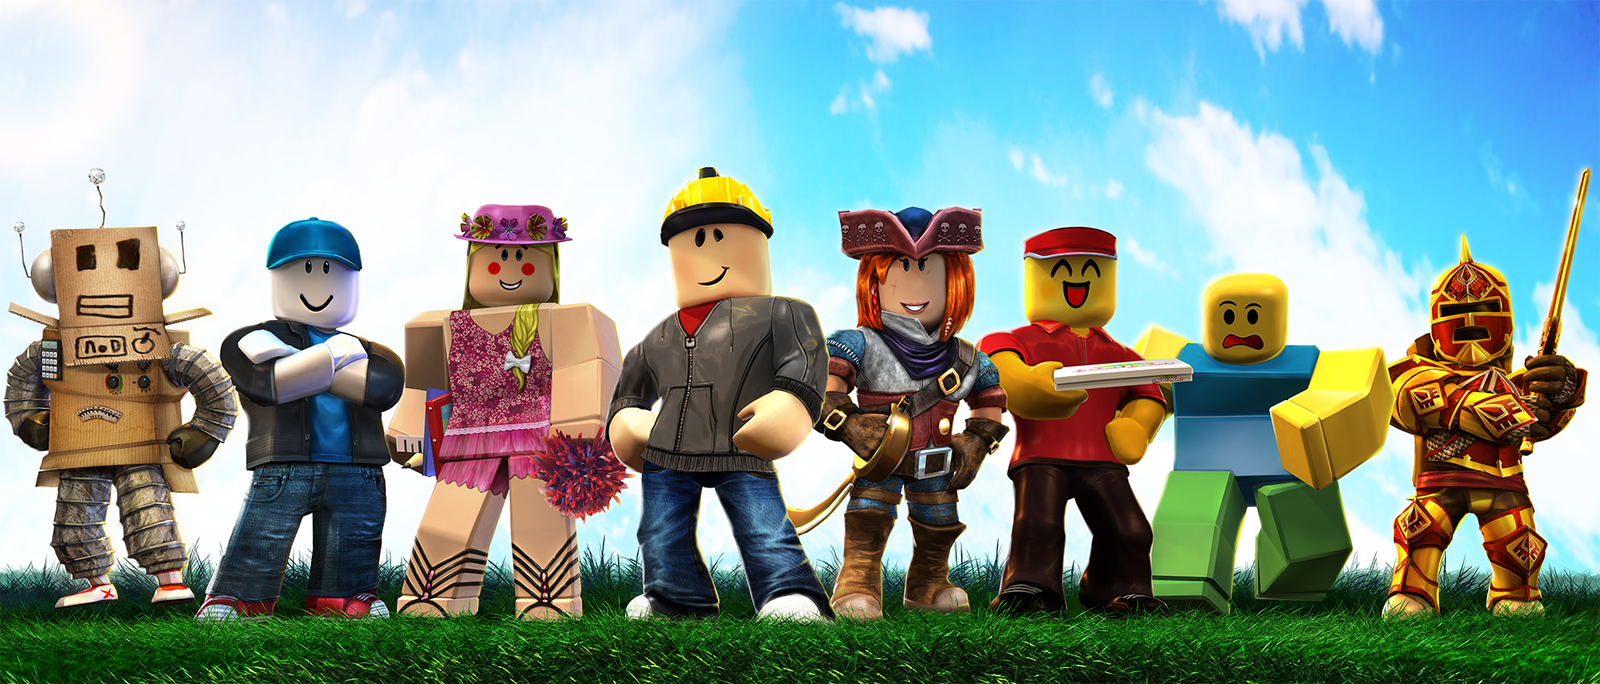 Roblox Bags 150m Funding Earmarked For International Expansion